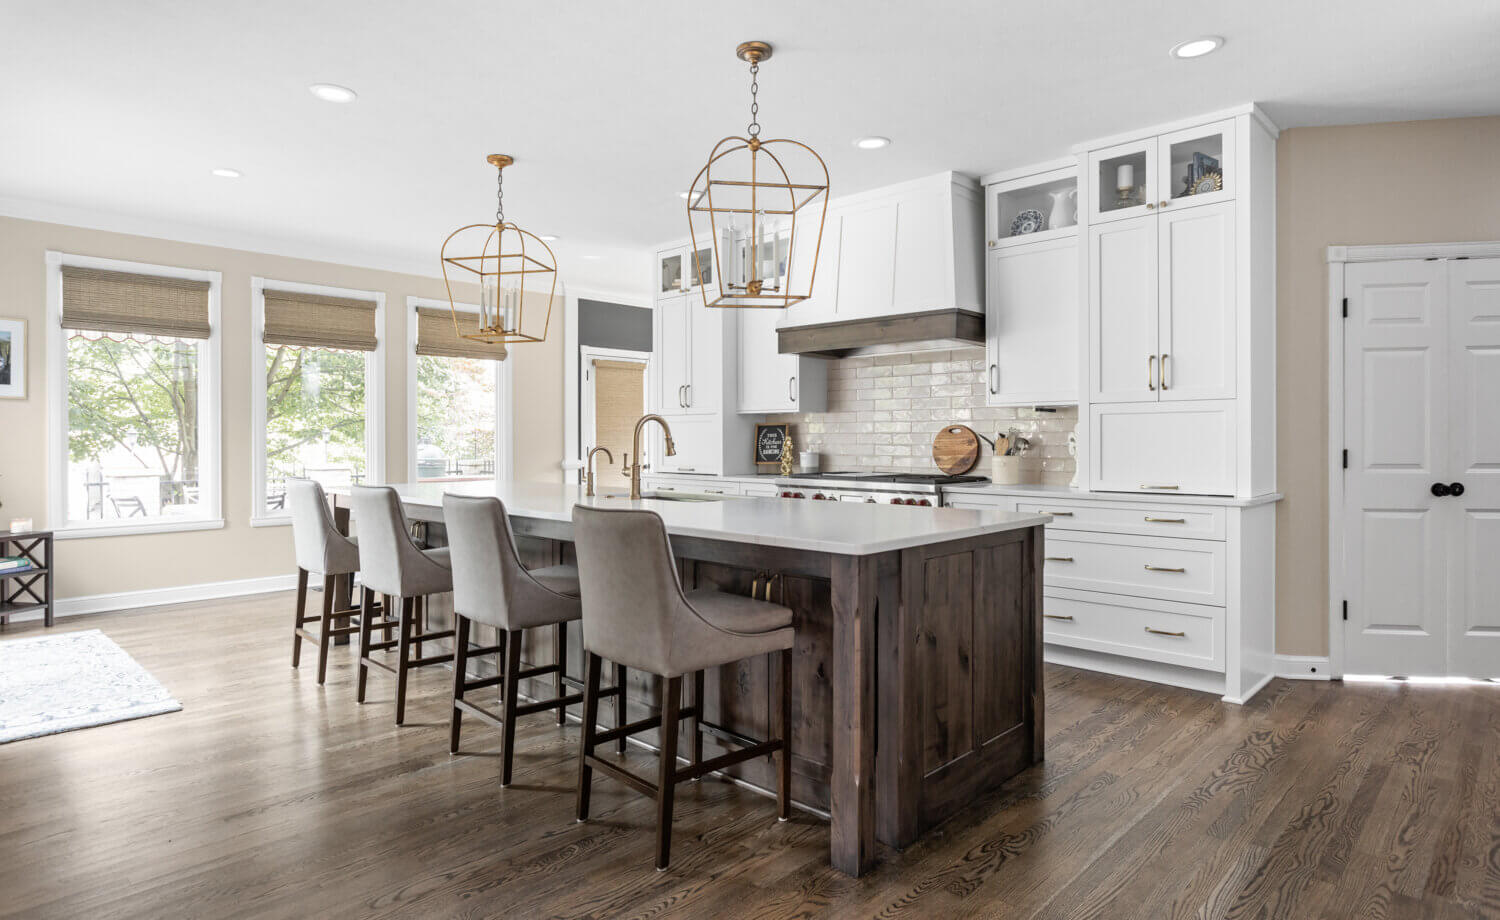 A timeless kitchen design with two-tone cabinets in white paint and dark stained knotty alder cabinets.